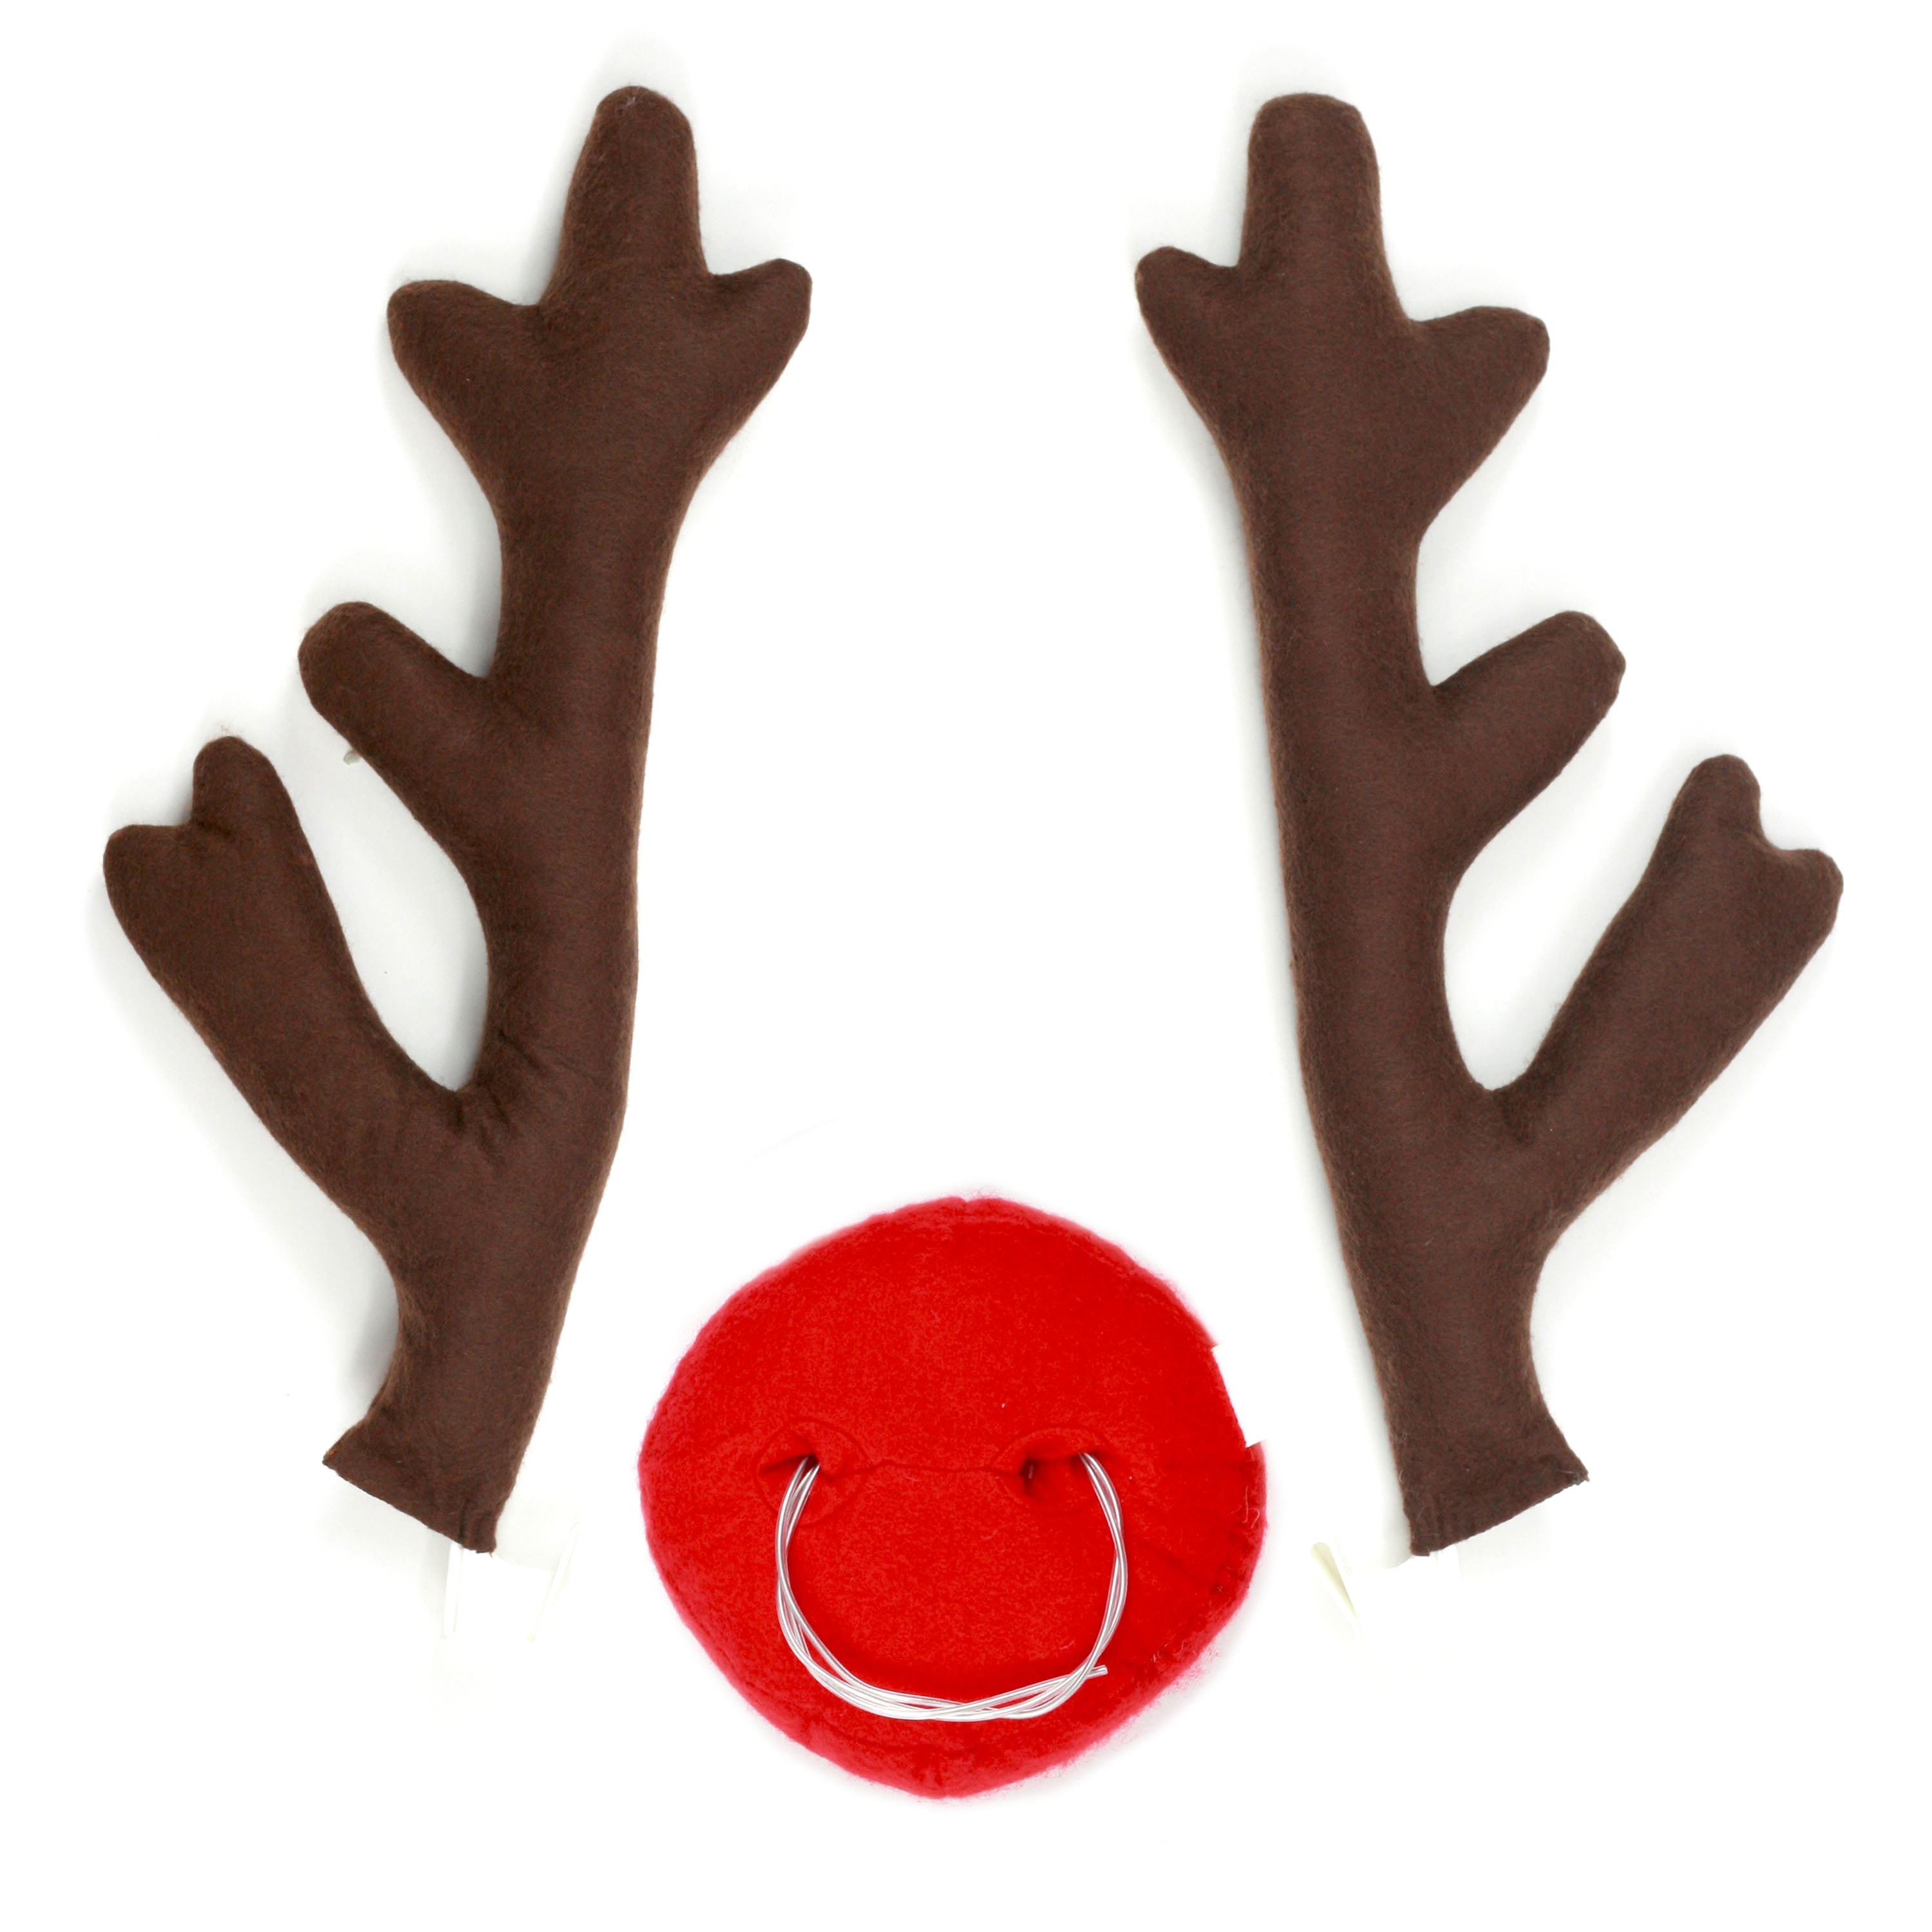 rudolph the red nosed reindeer outfit